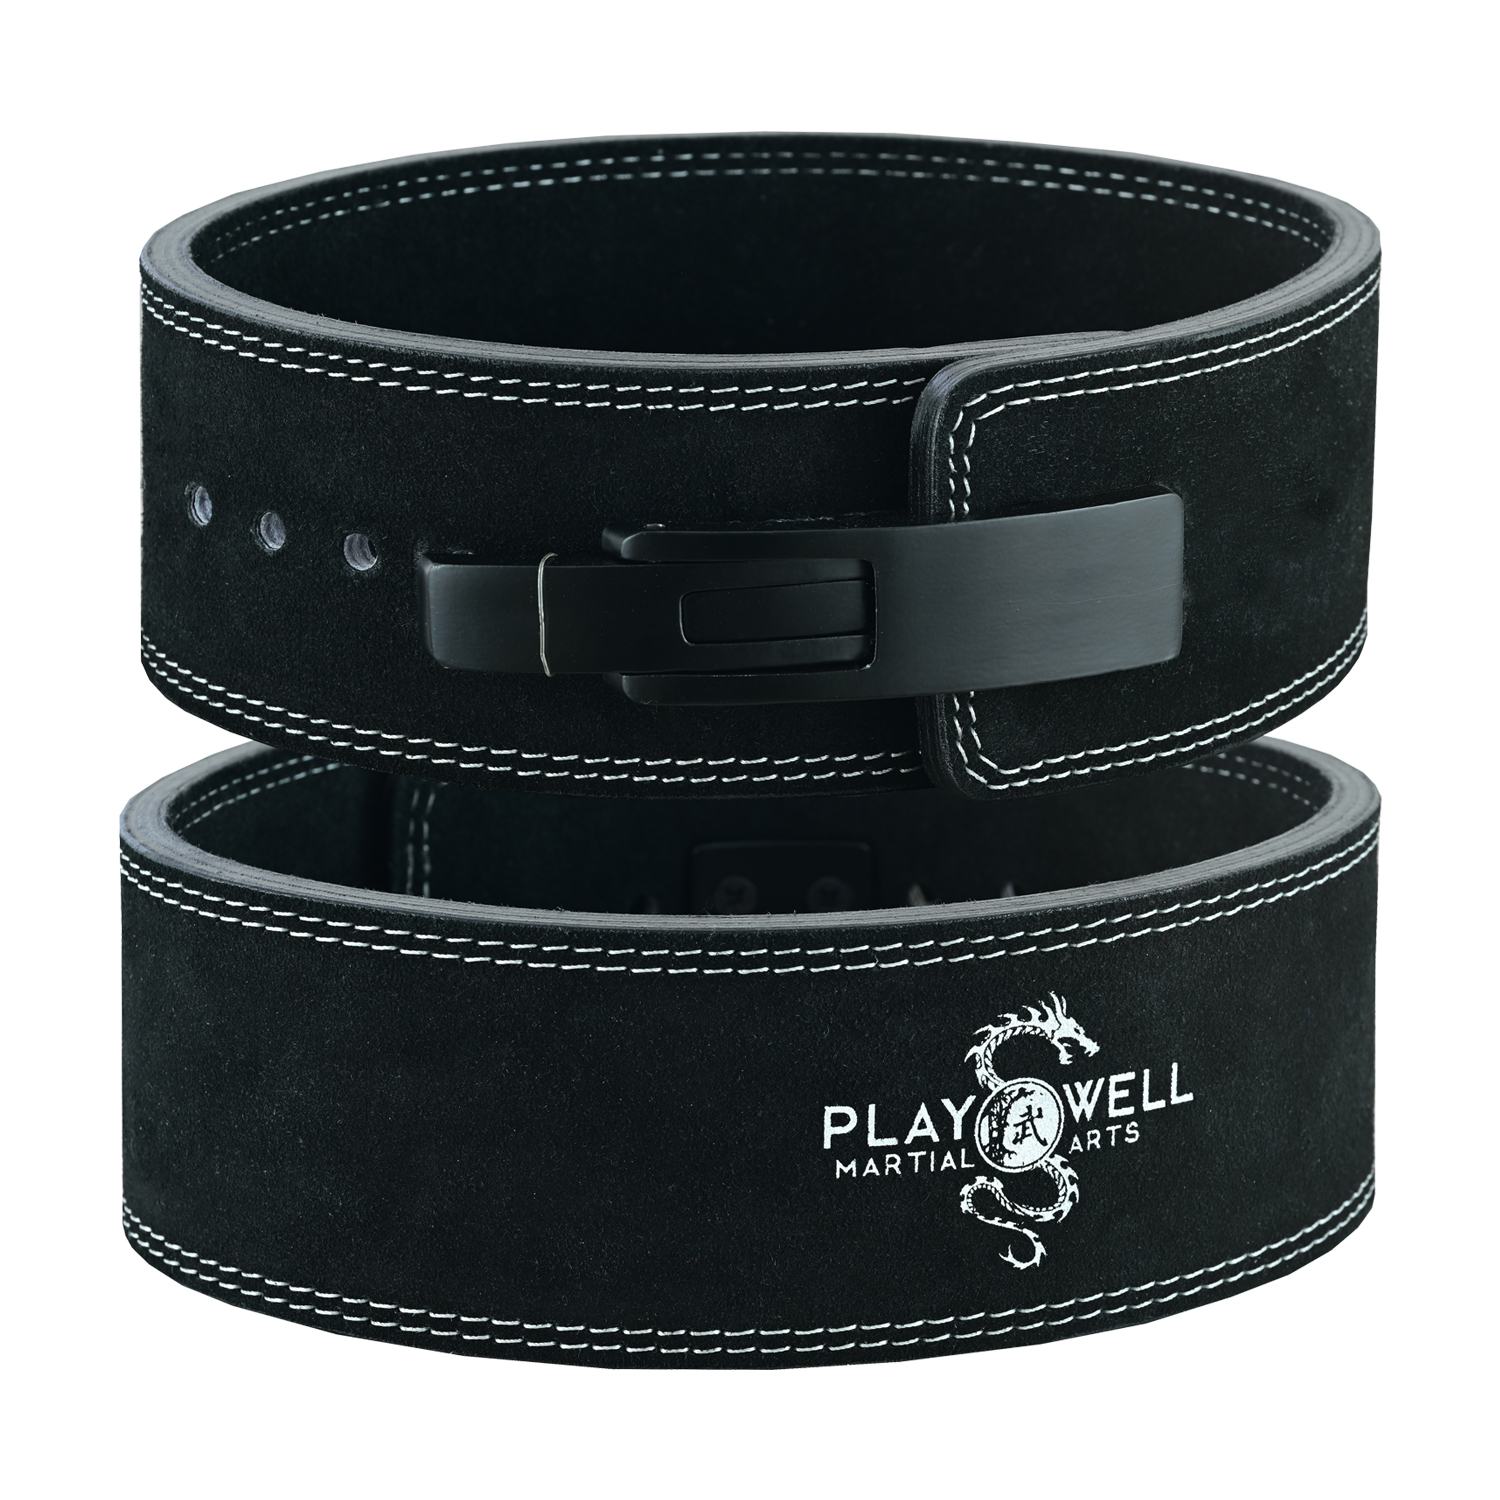 Pro Weight Training Range: Weight Lifting Lever Belt - Click Image to Close